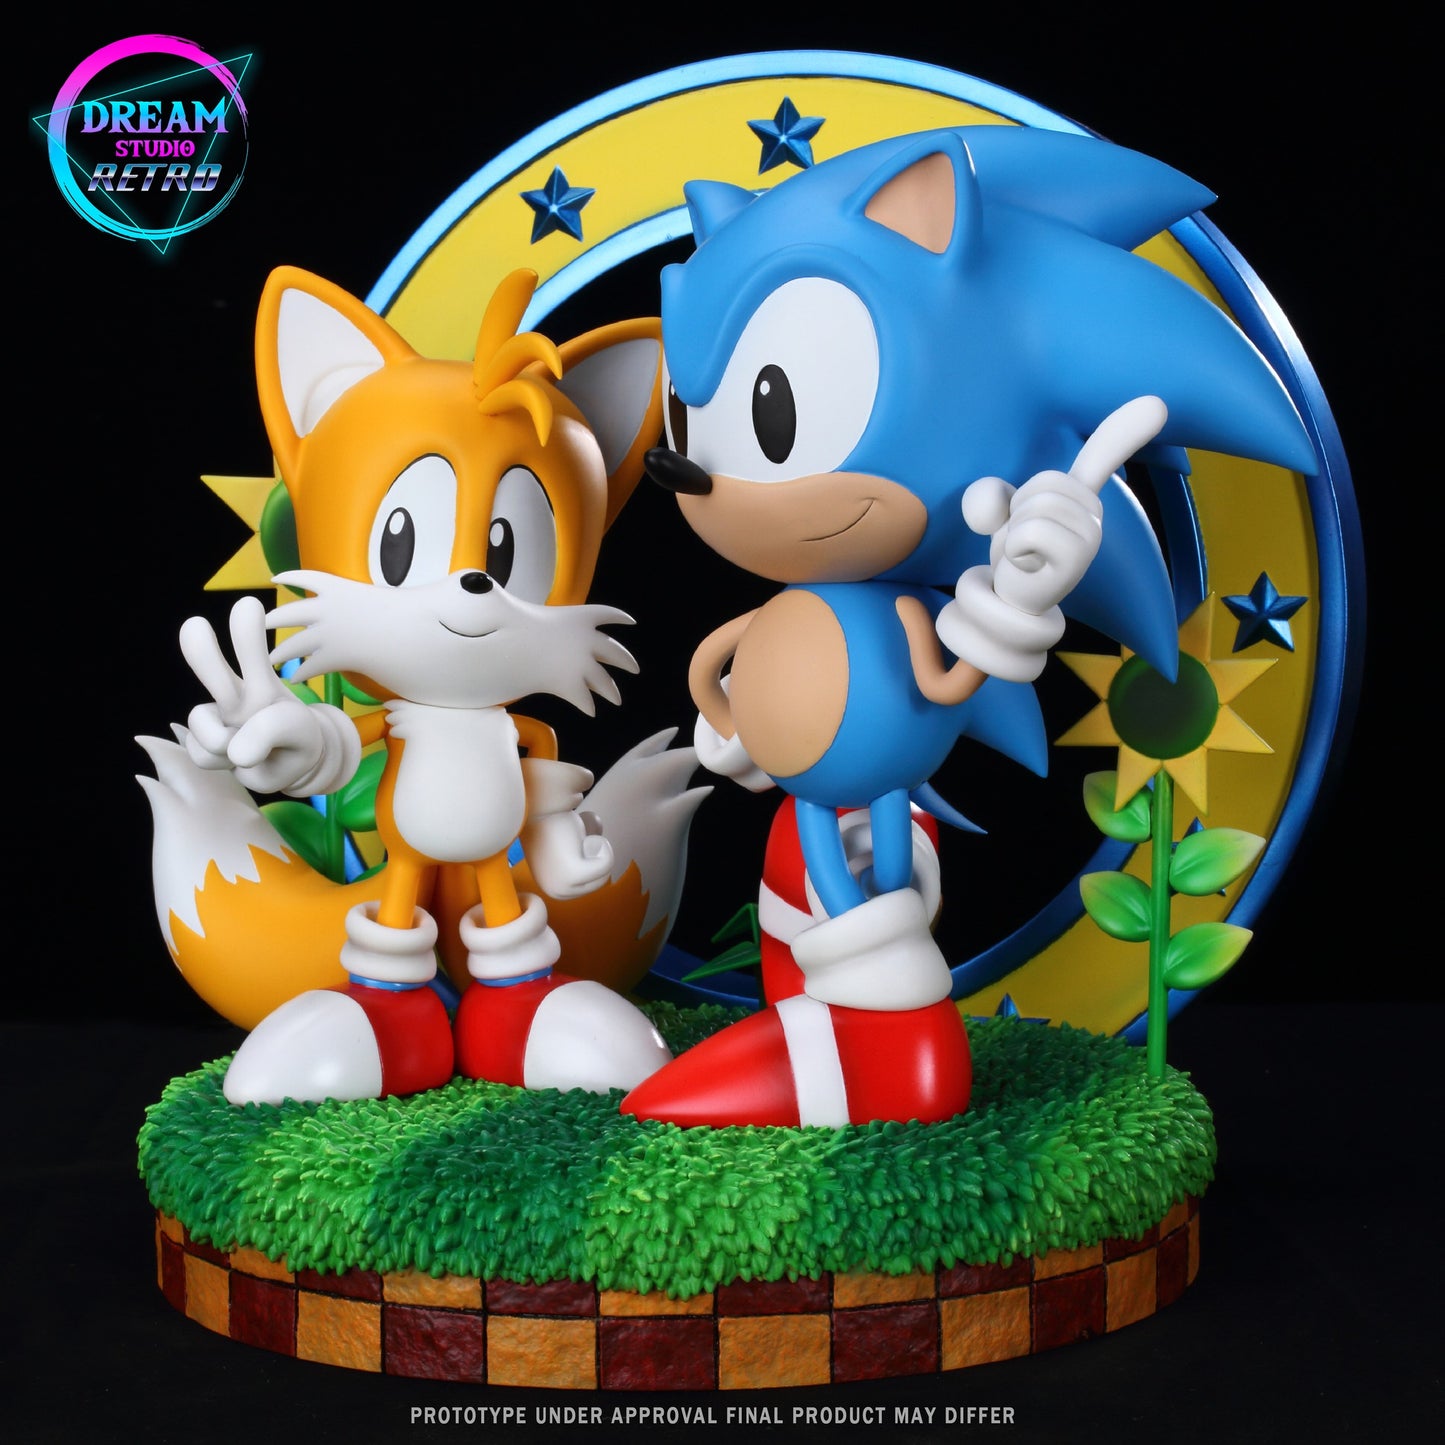 Dream - Sonic the Hedgehog and Tails